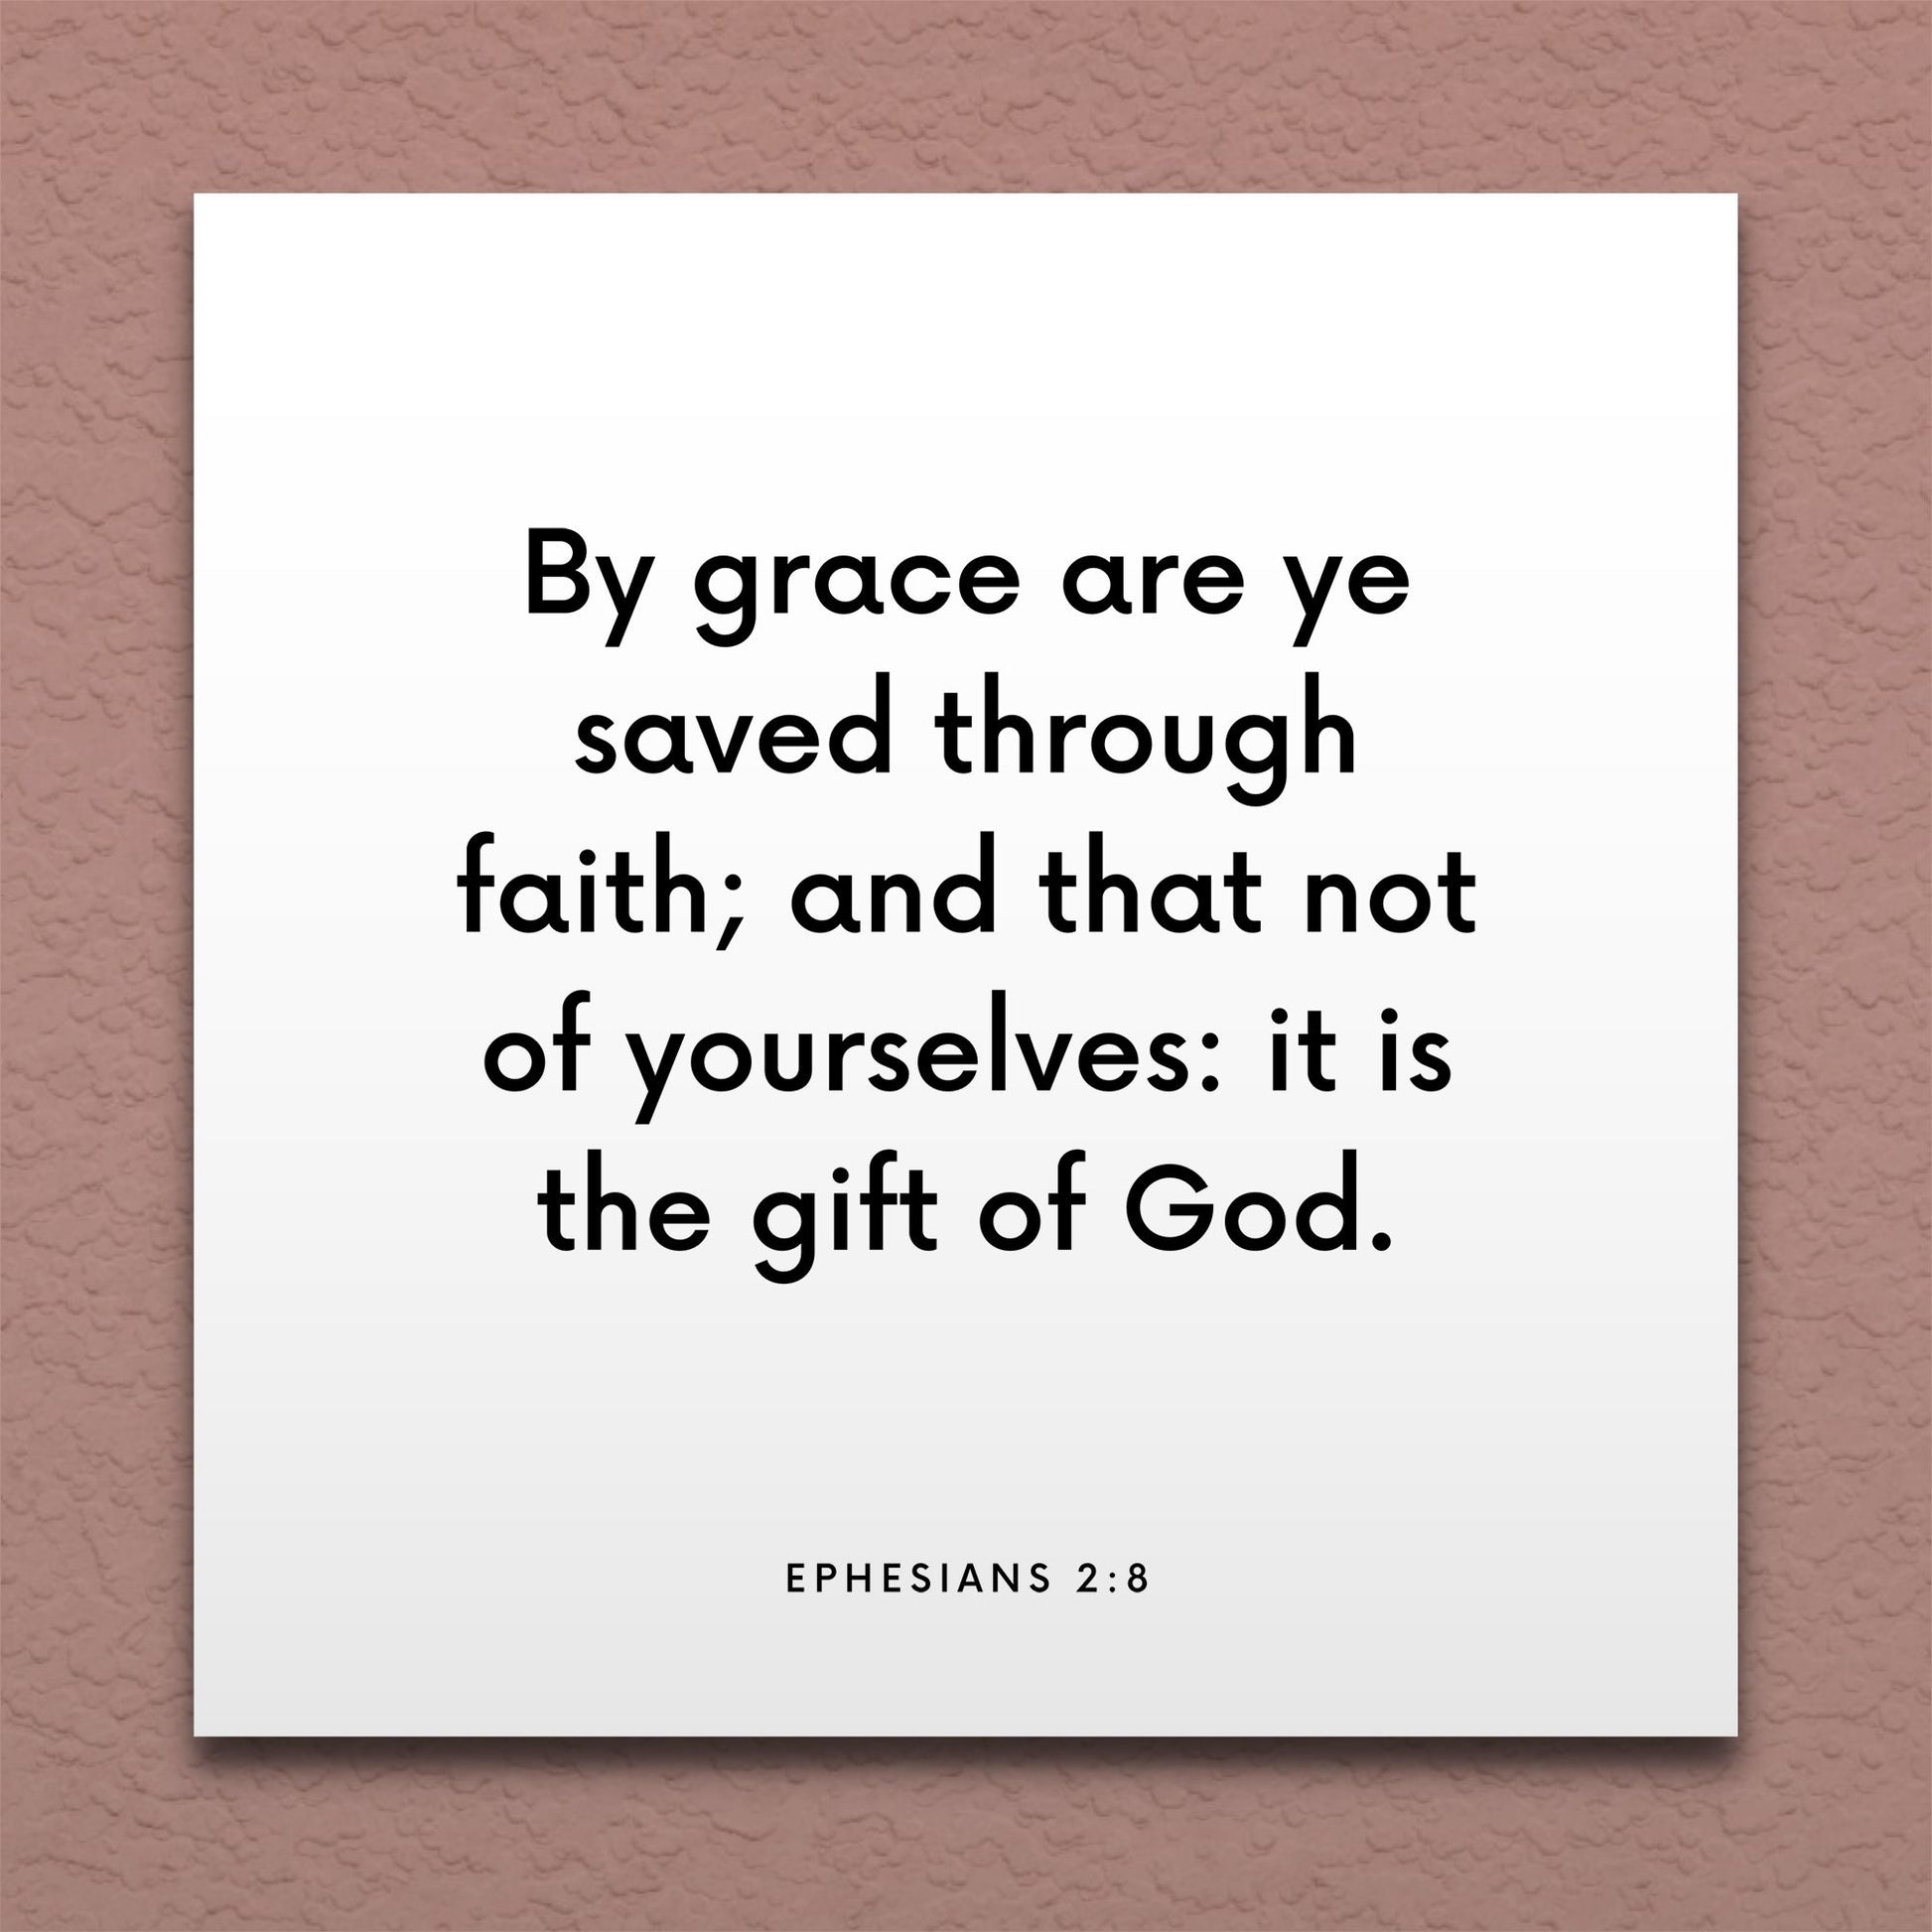 Wall-mounted scripture tile for Ephesians 2:8 - "By grace are ye saved through faith"